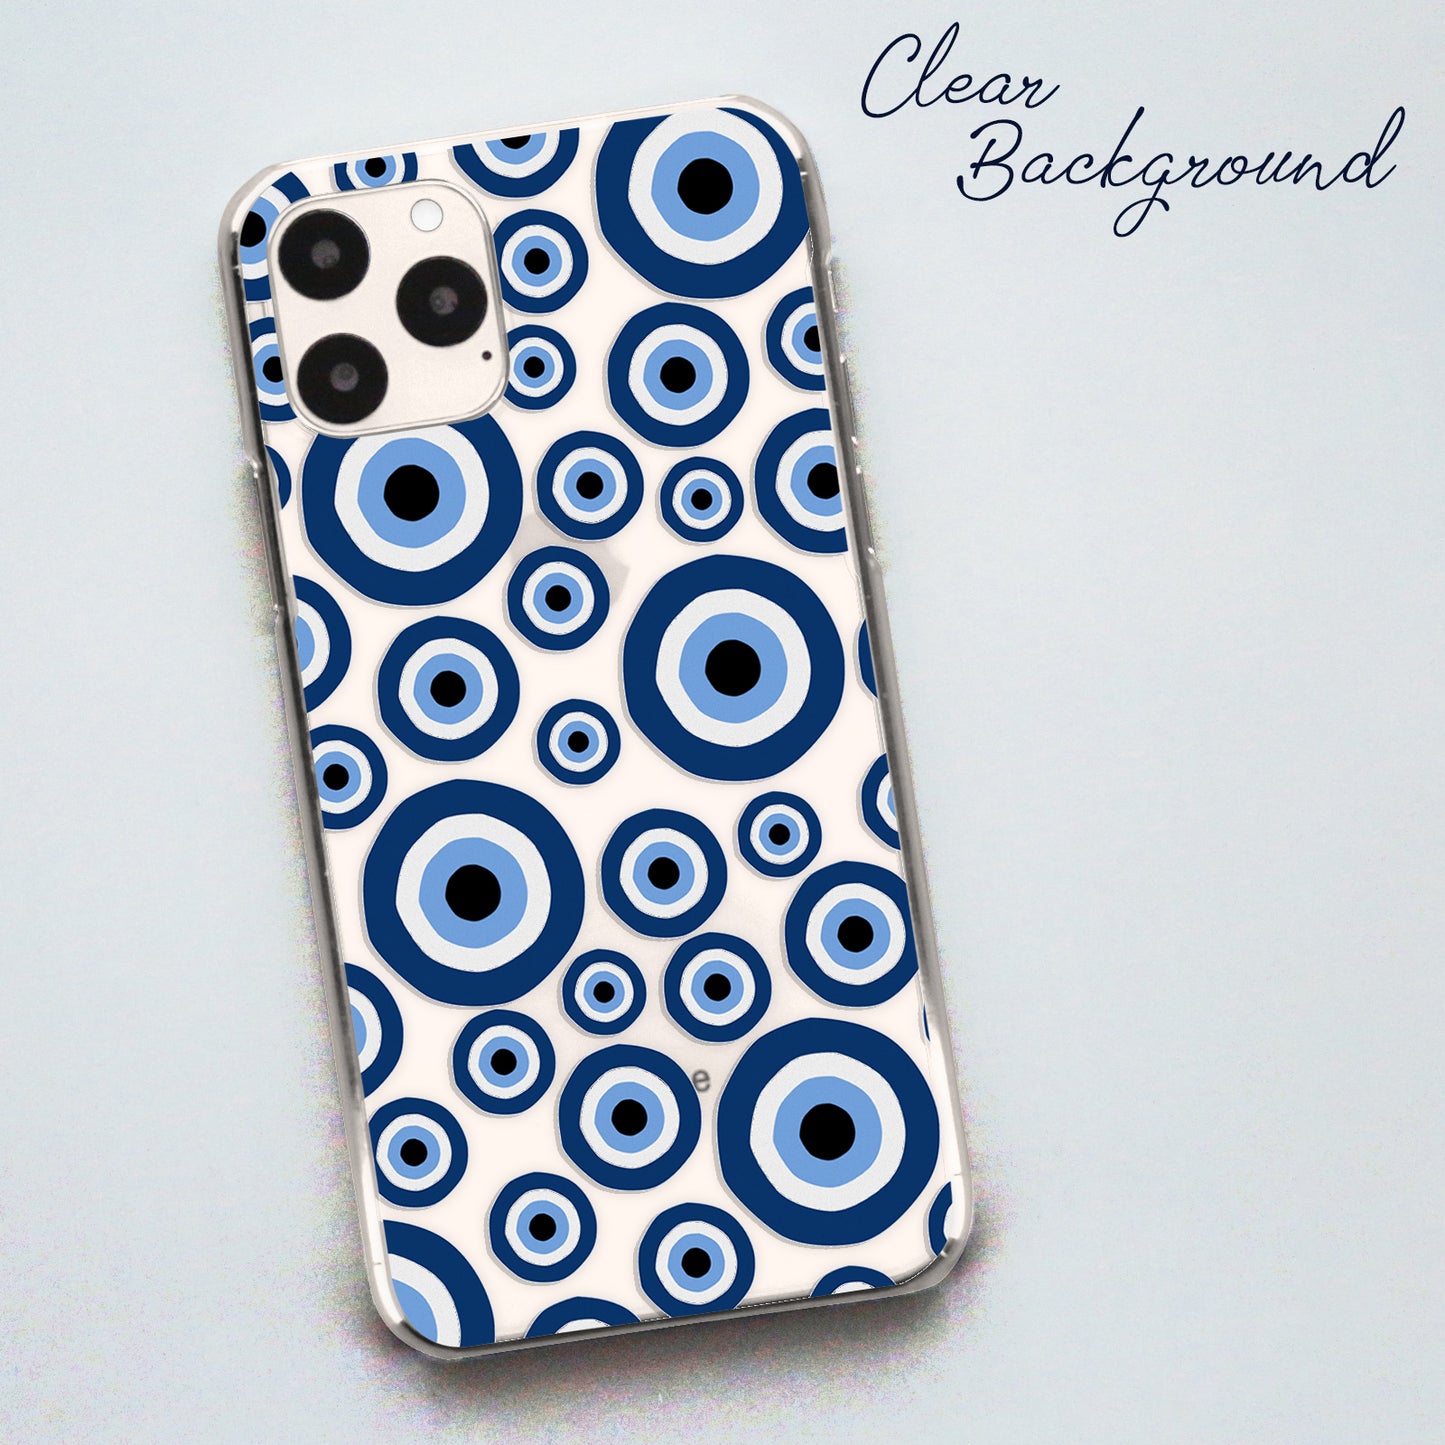 Evil Eyes Phone Case for Apple iPhone - Grey and Blue Evil Eyes Stickerbomb